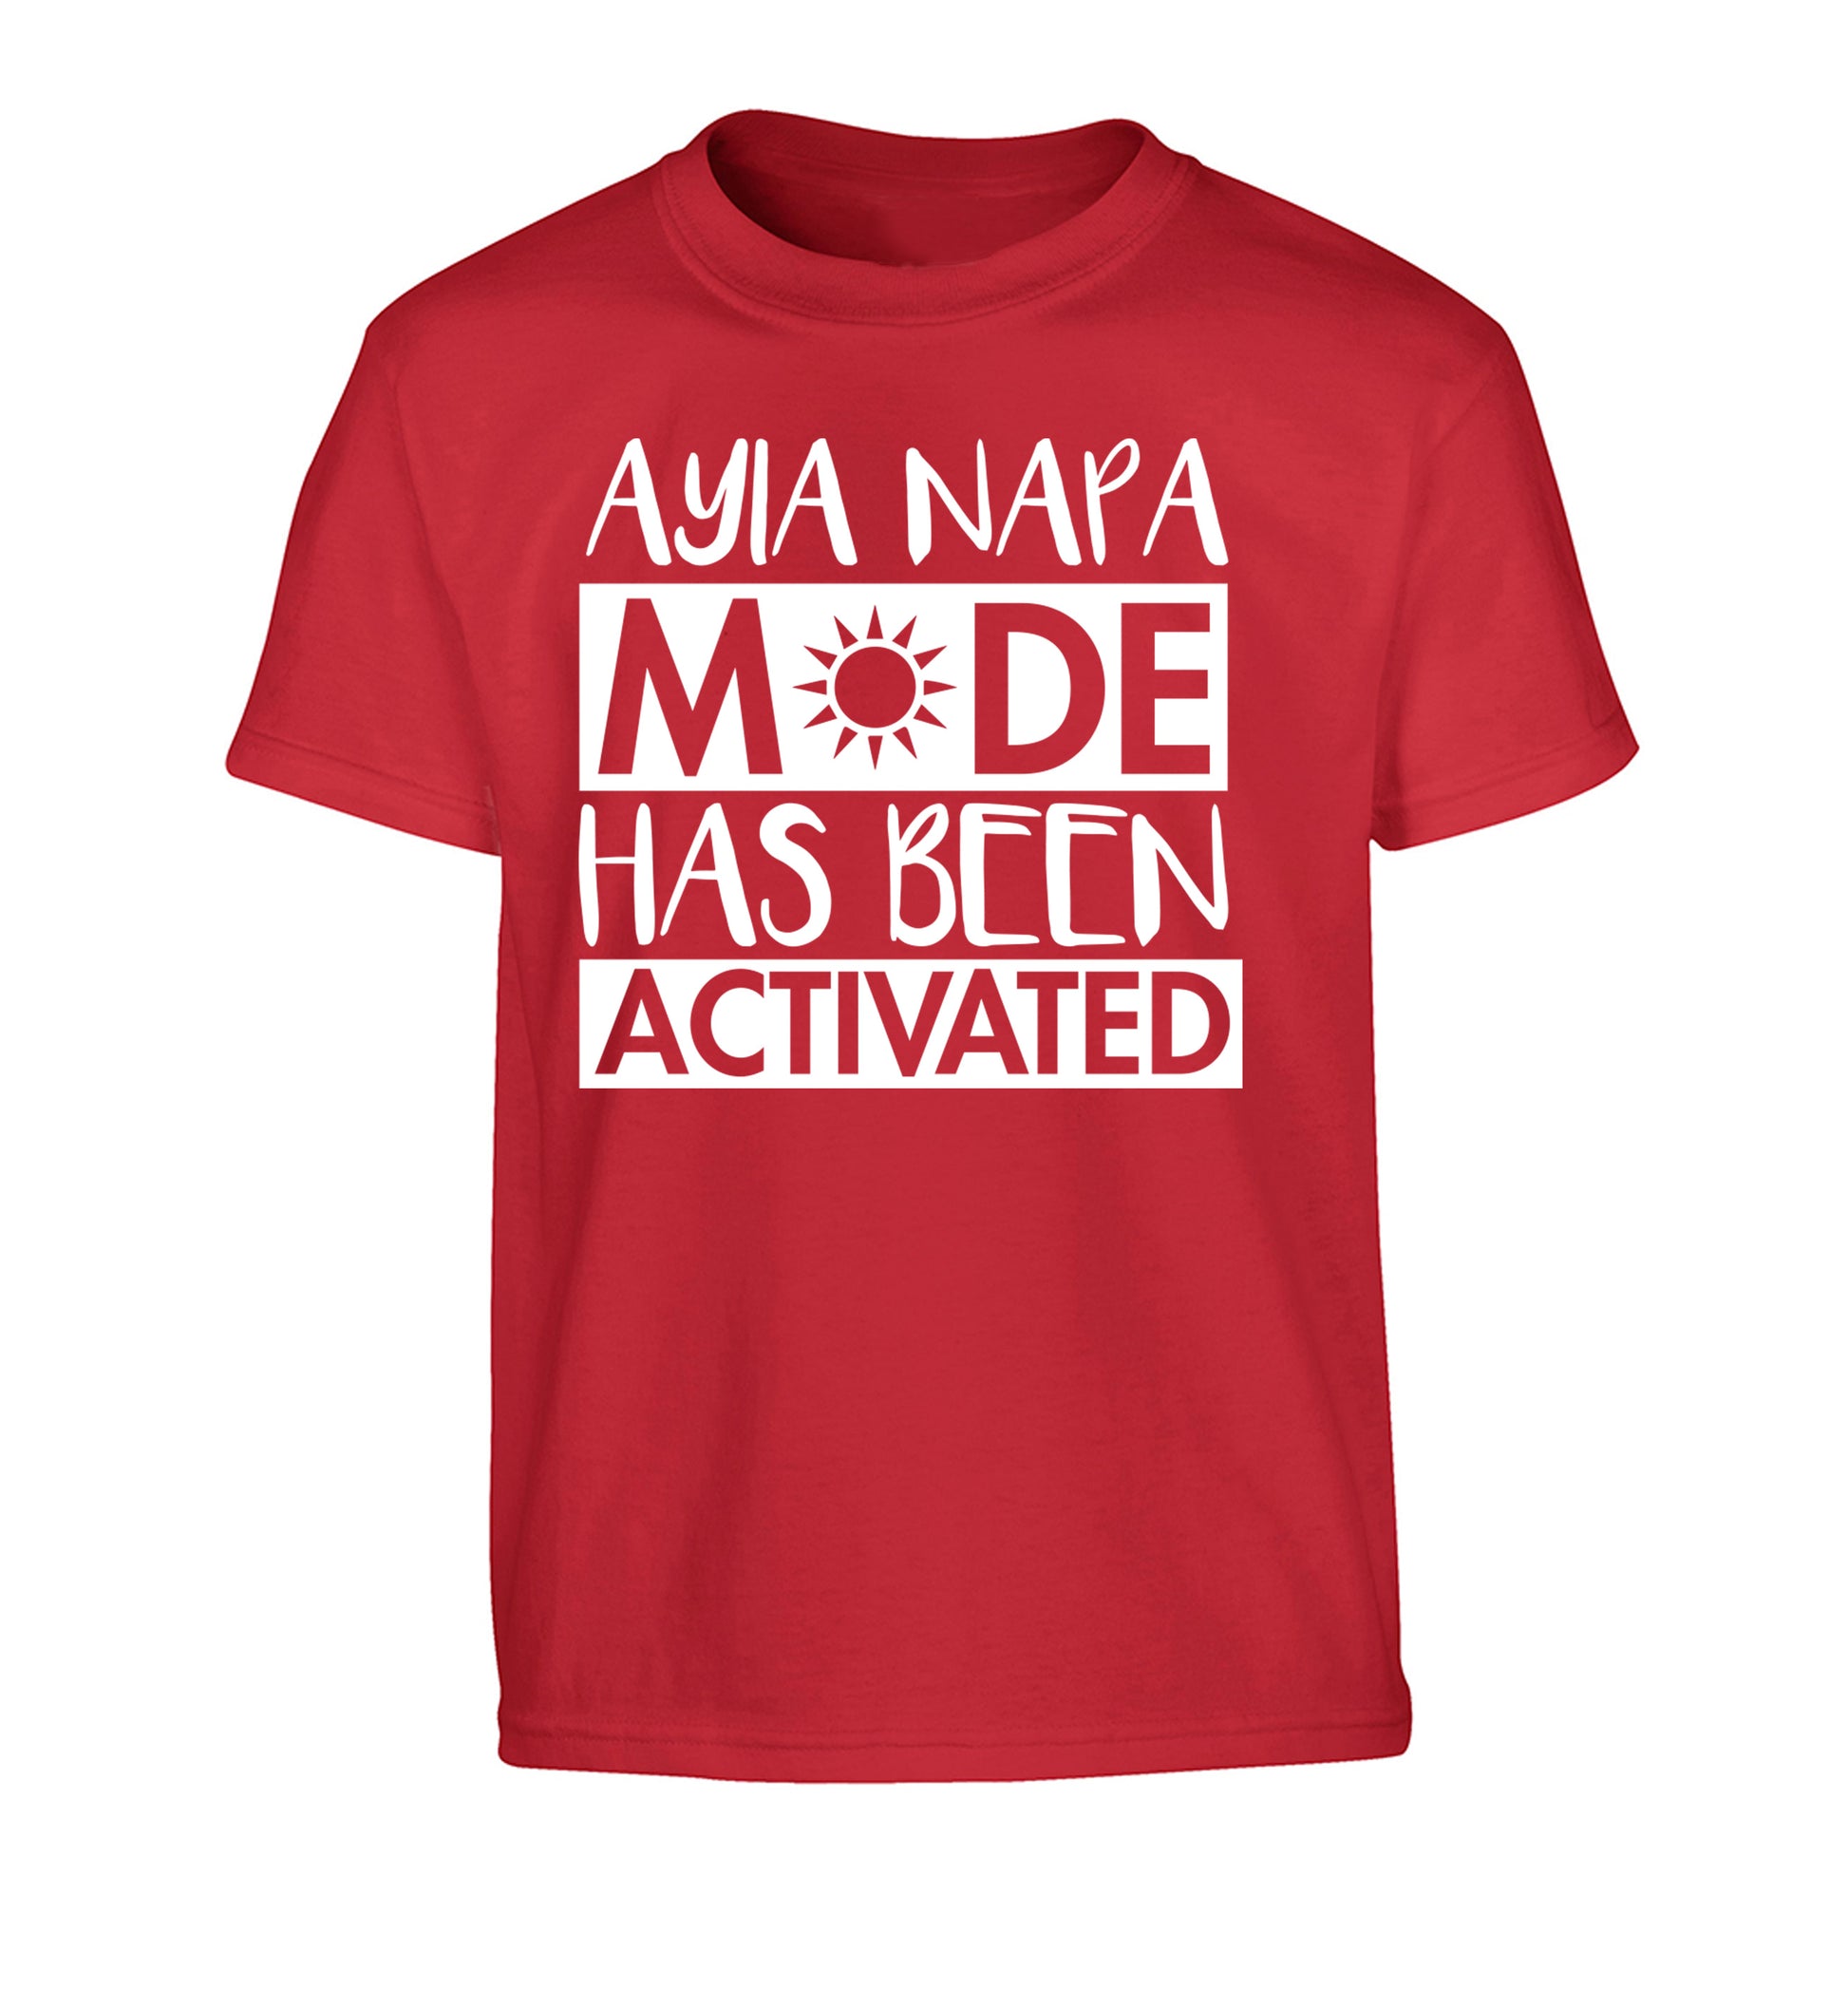 Ayia Napa mode has been activated Children's red Tshirt 12-13 Years